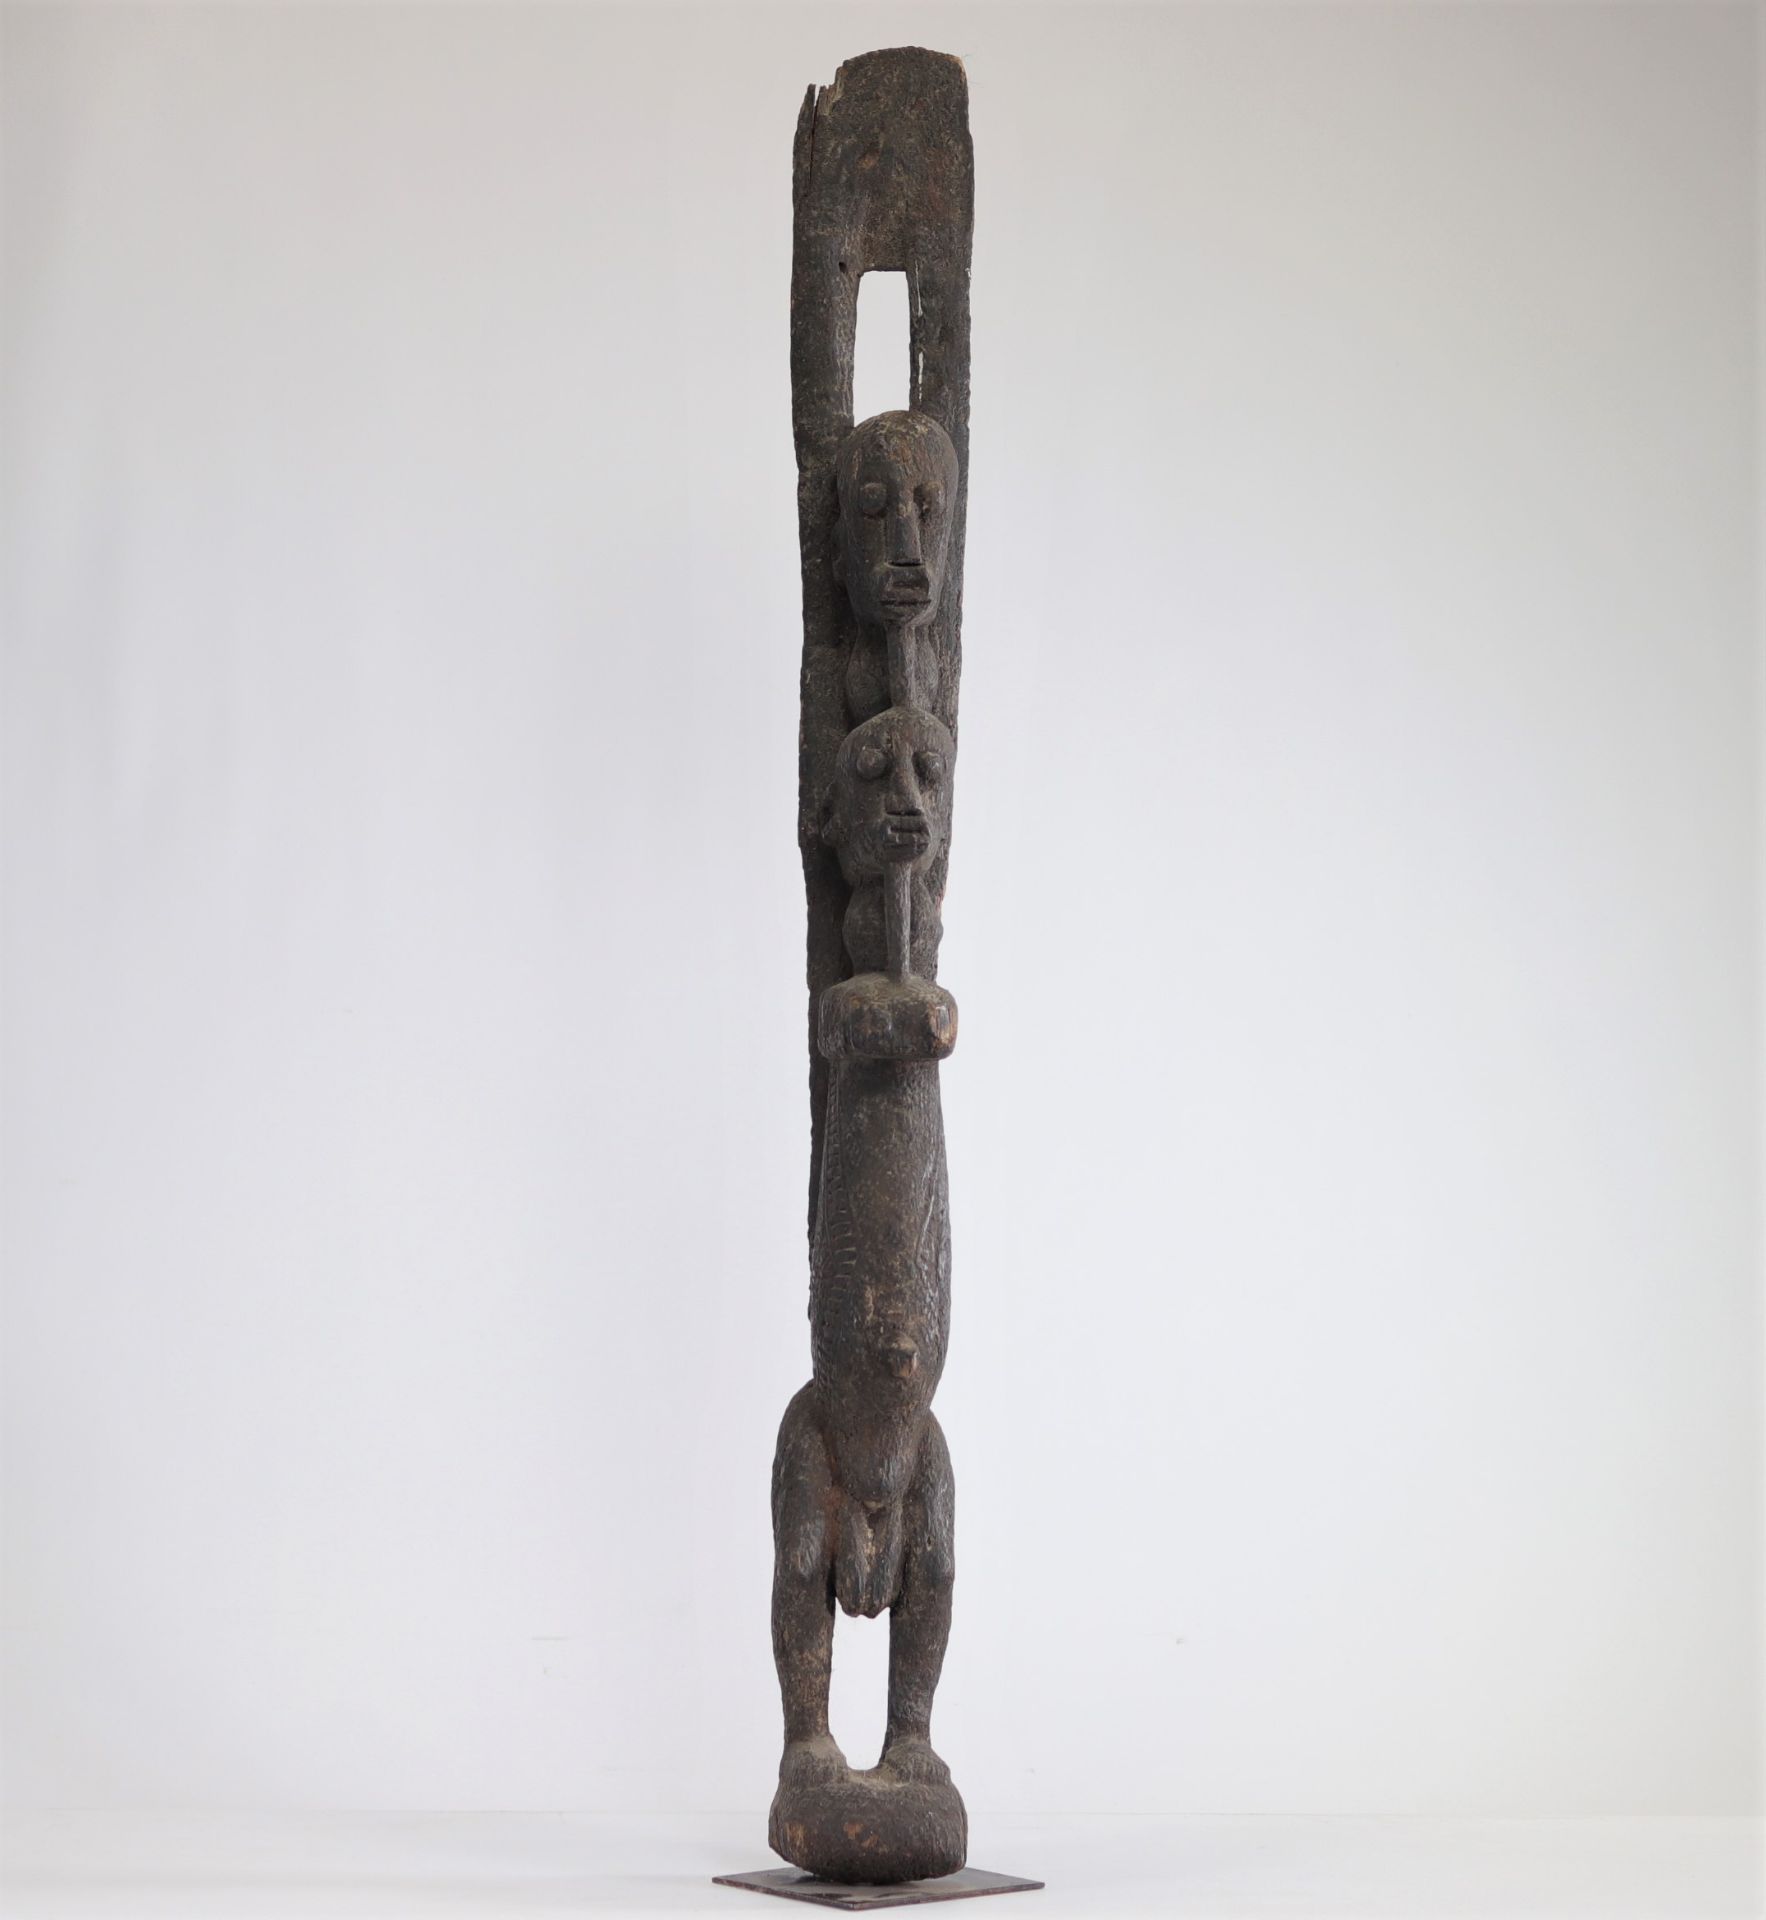 Wooden statue with crusty patina from the Dogon country, Mali - Image 4 of 4